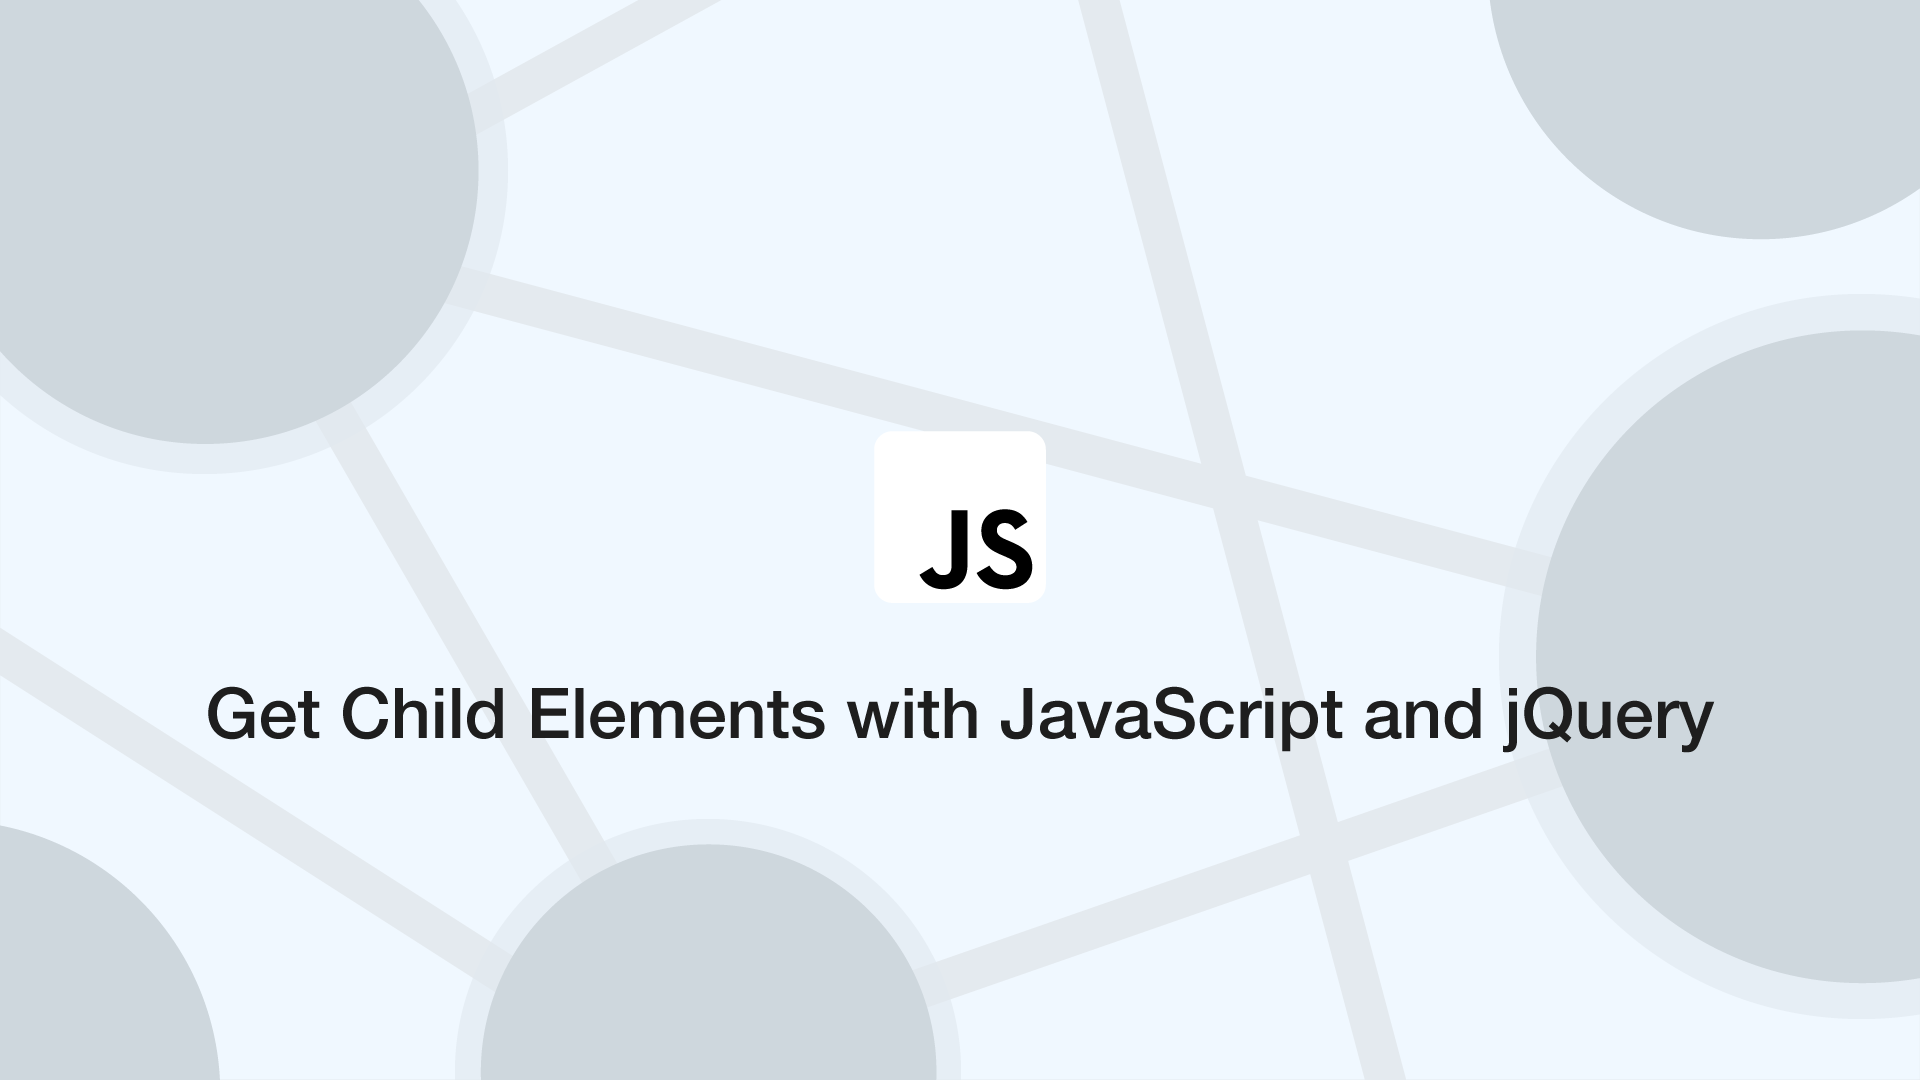 Get Child Elements with JavaScript and jQuery   SkillSugar